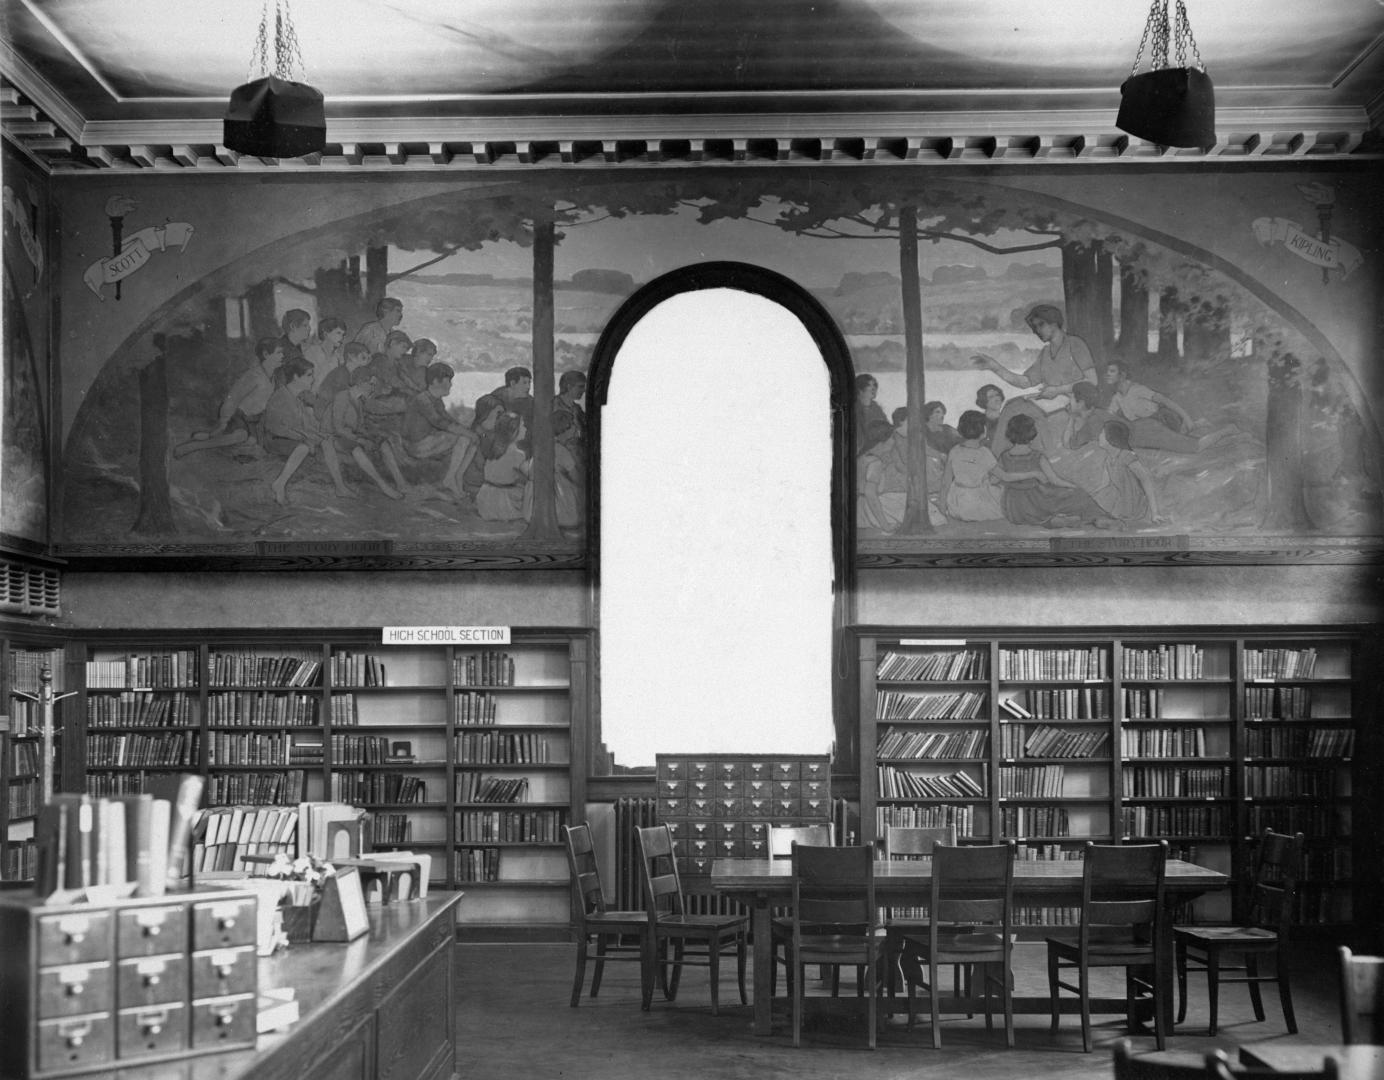 Image shows an interior of the library branch with book stacks along the walls, the staff desk  ...